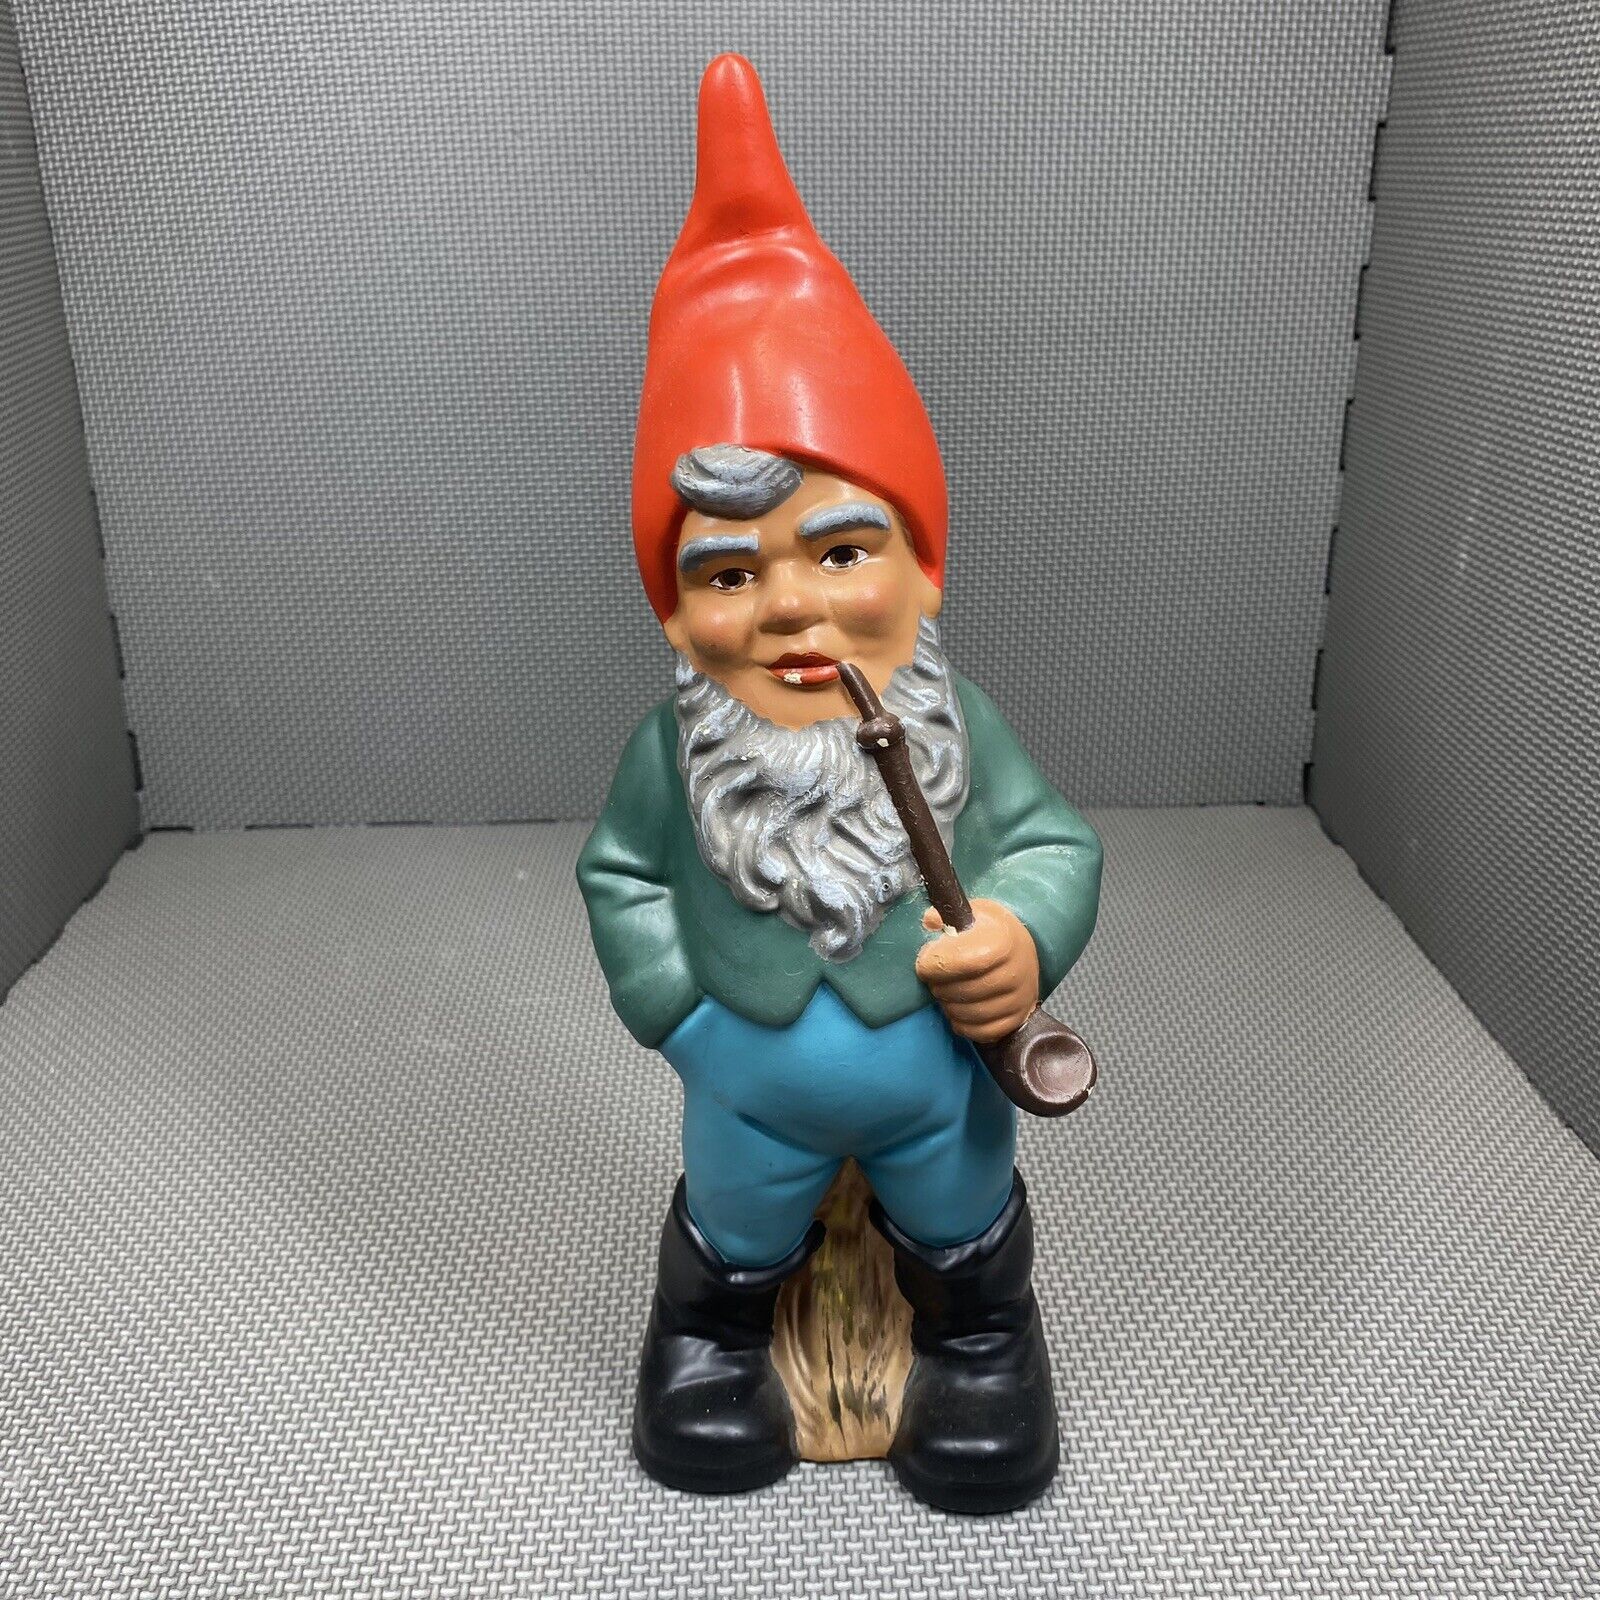 Vintage Heissner West Germany Gnome Statue Smoking Pipe 13 Inch Garden Figure